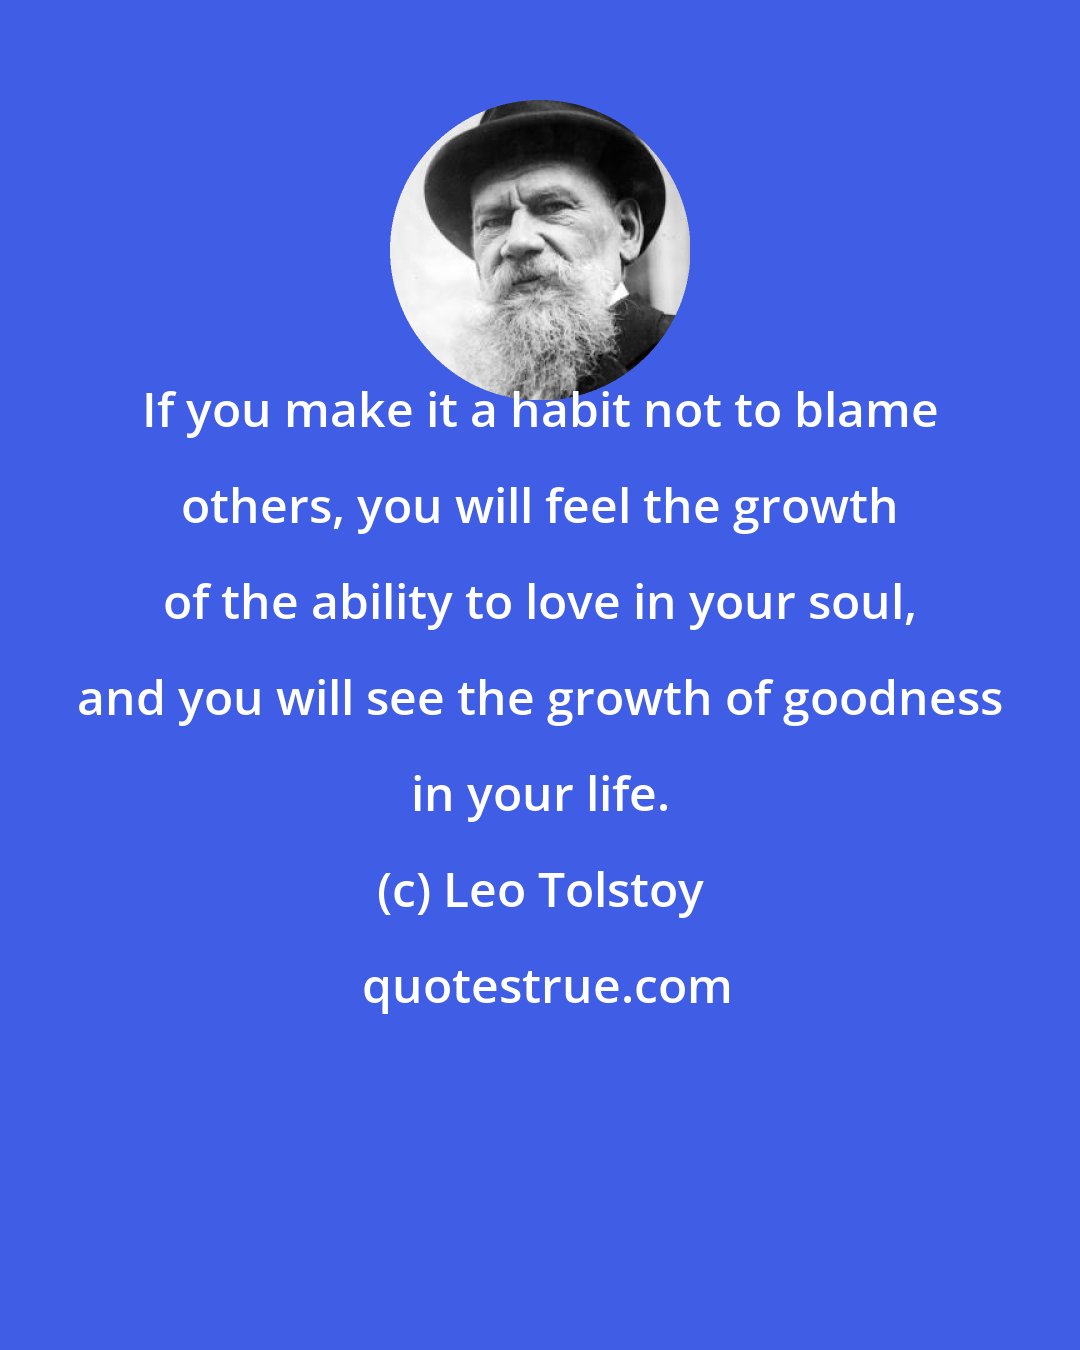 Leo Tolstoy: If you make it a habit not to blame others, you will feel the growth of the ability to love in your soul, and you will see the growth of goodness in your life.